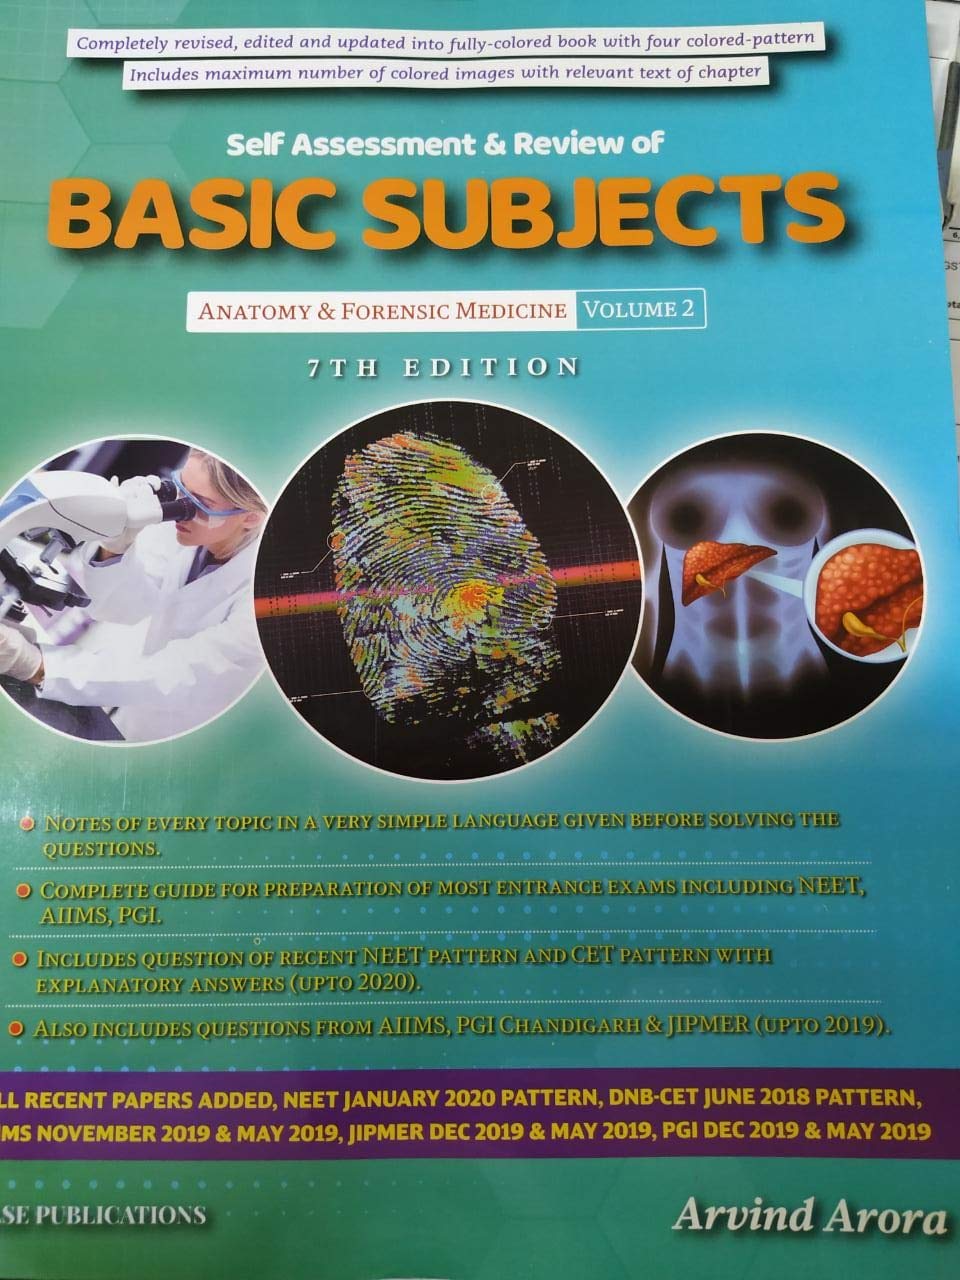 Self Assessment & Review Of Basic Subjects : Anatomy & Forensic Medicine Vol 2